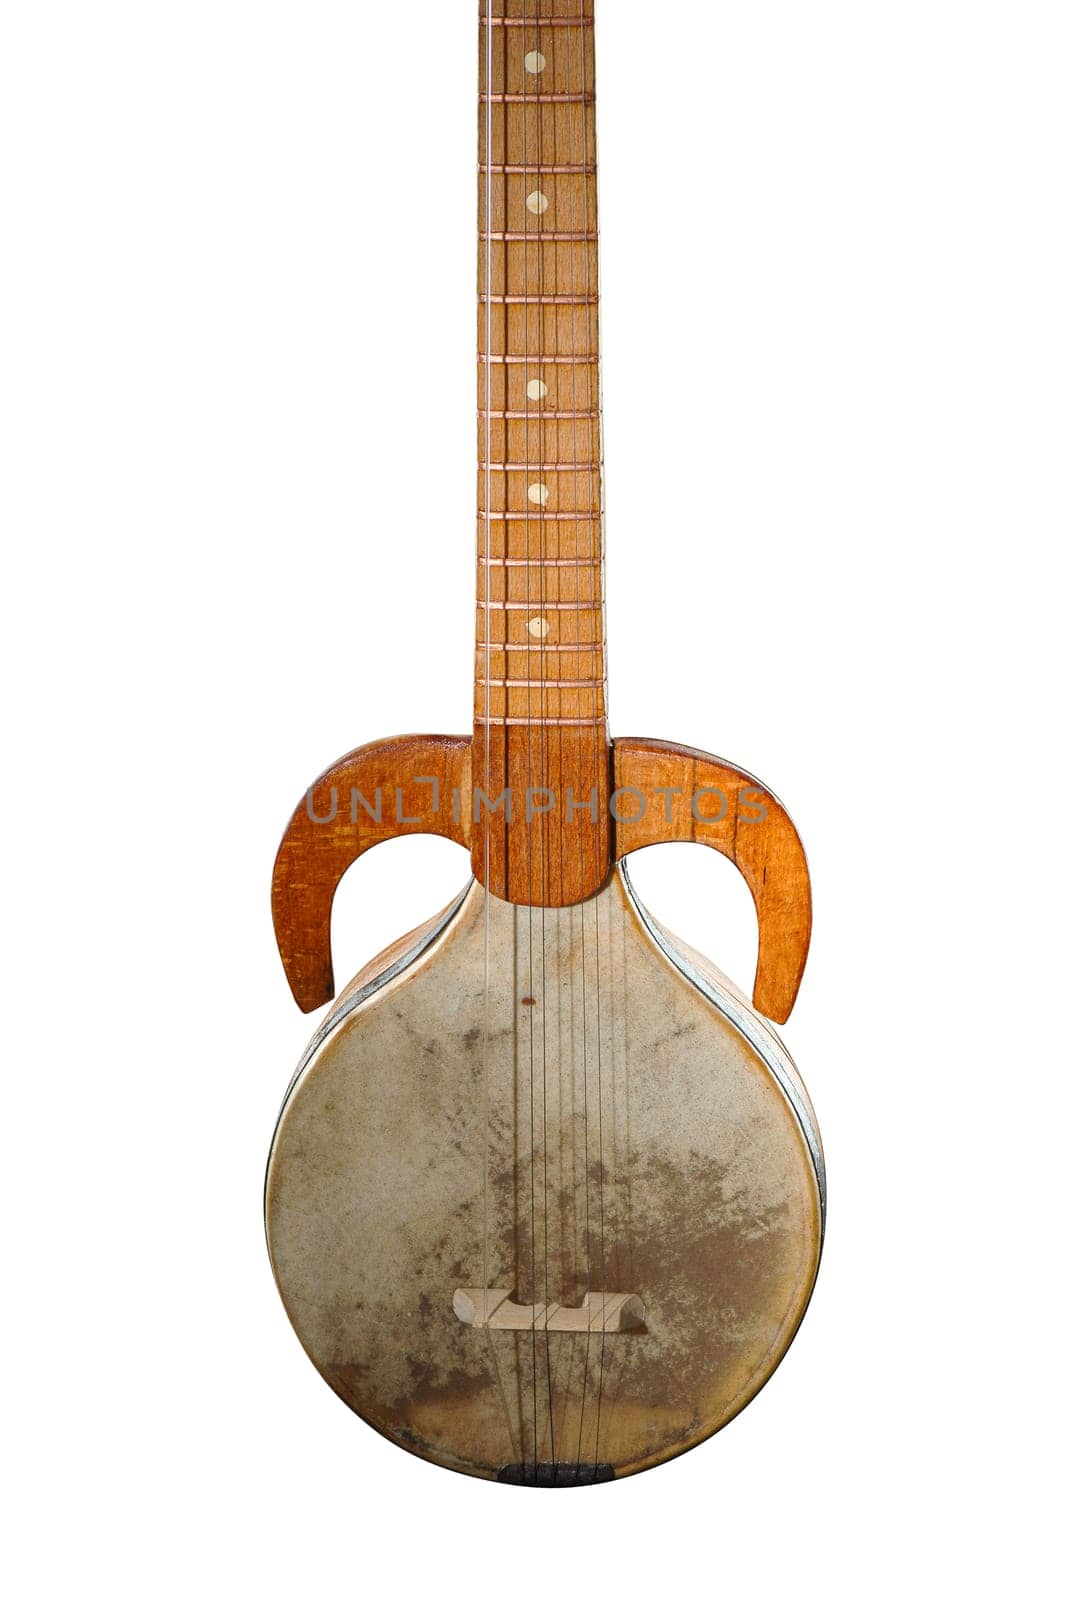 An ancient Asian stringed musical instrument on a white background by A_Karim